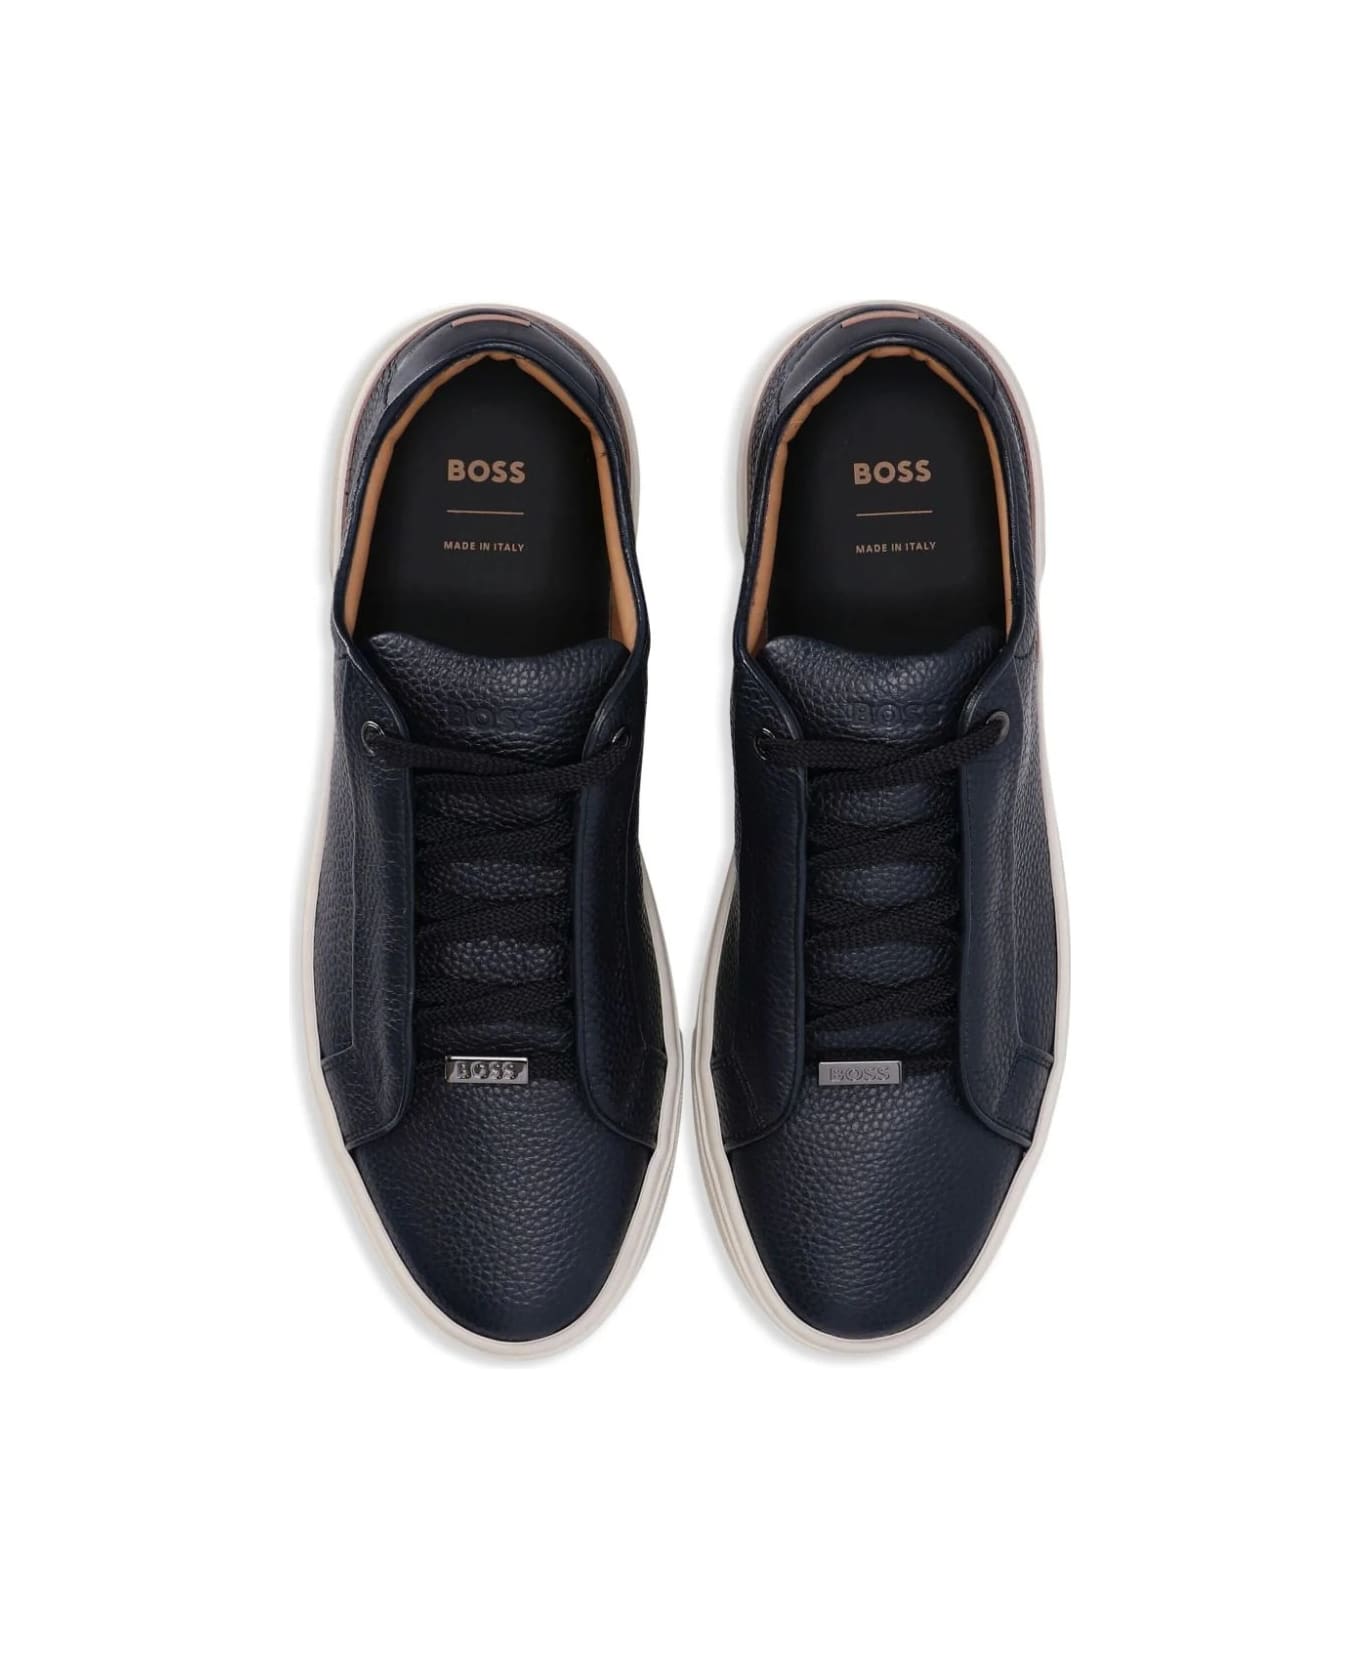 Hugo Boss Blue Grained Leather Sneakers With Logo Tag On Laces - Blue スニーカー